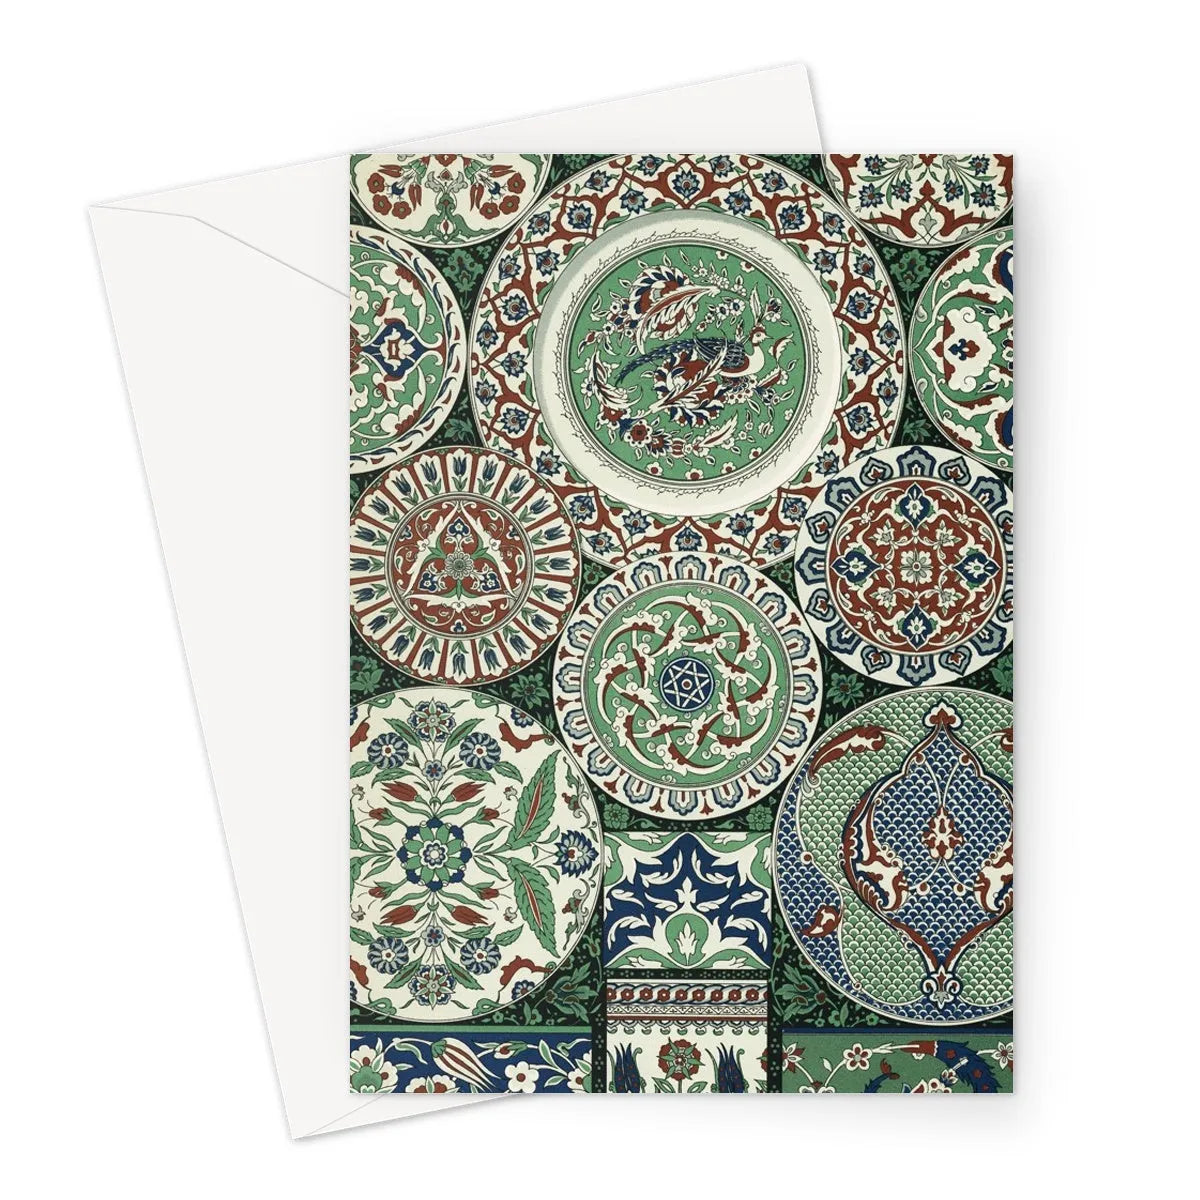 Islamic Pattern - Auguste Racinet Arabesque Greeting Card - A5 Portrait / 1 Card - Greeting & Note Cards - Aesthetic Art